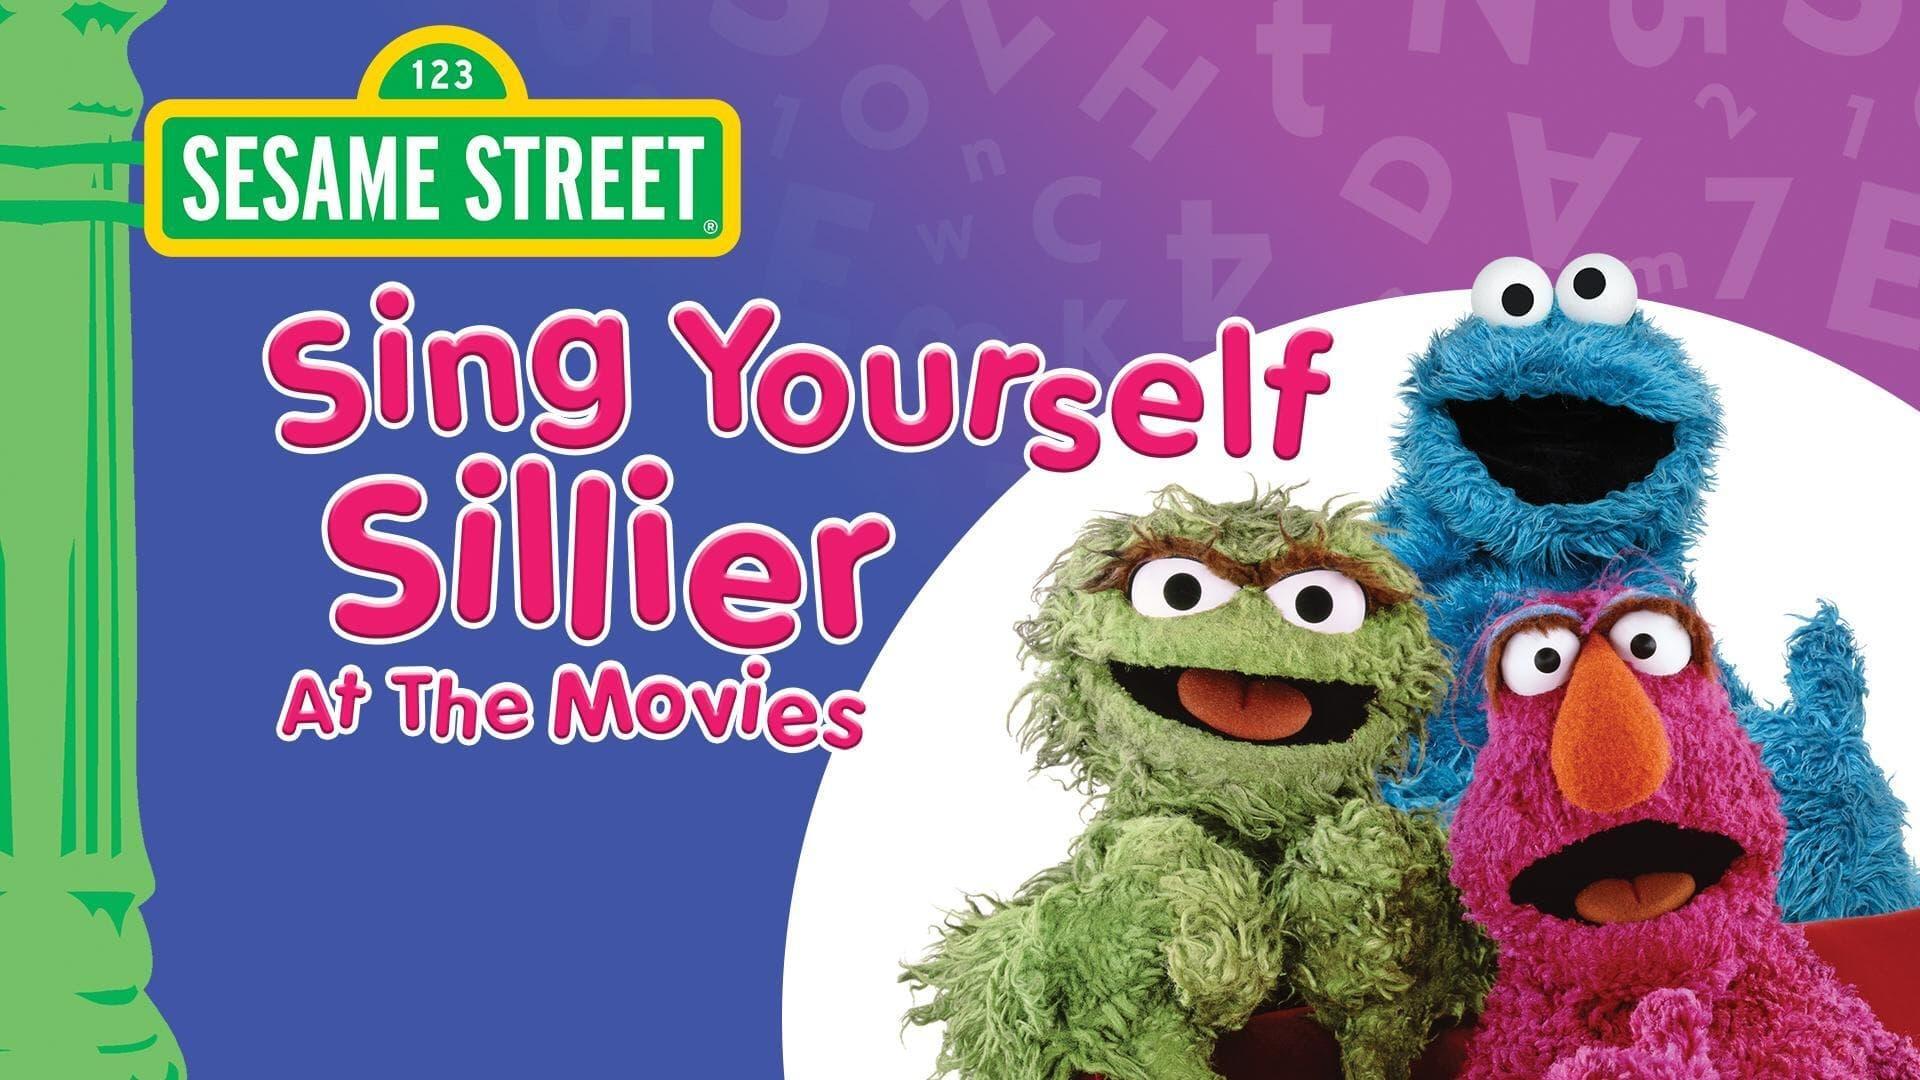 Sesame Street: Sing Yourself Sillier at the Movies backdrop